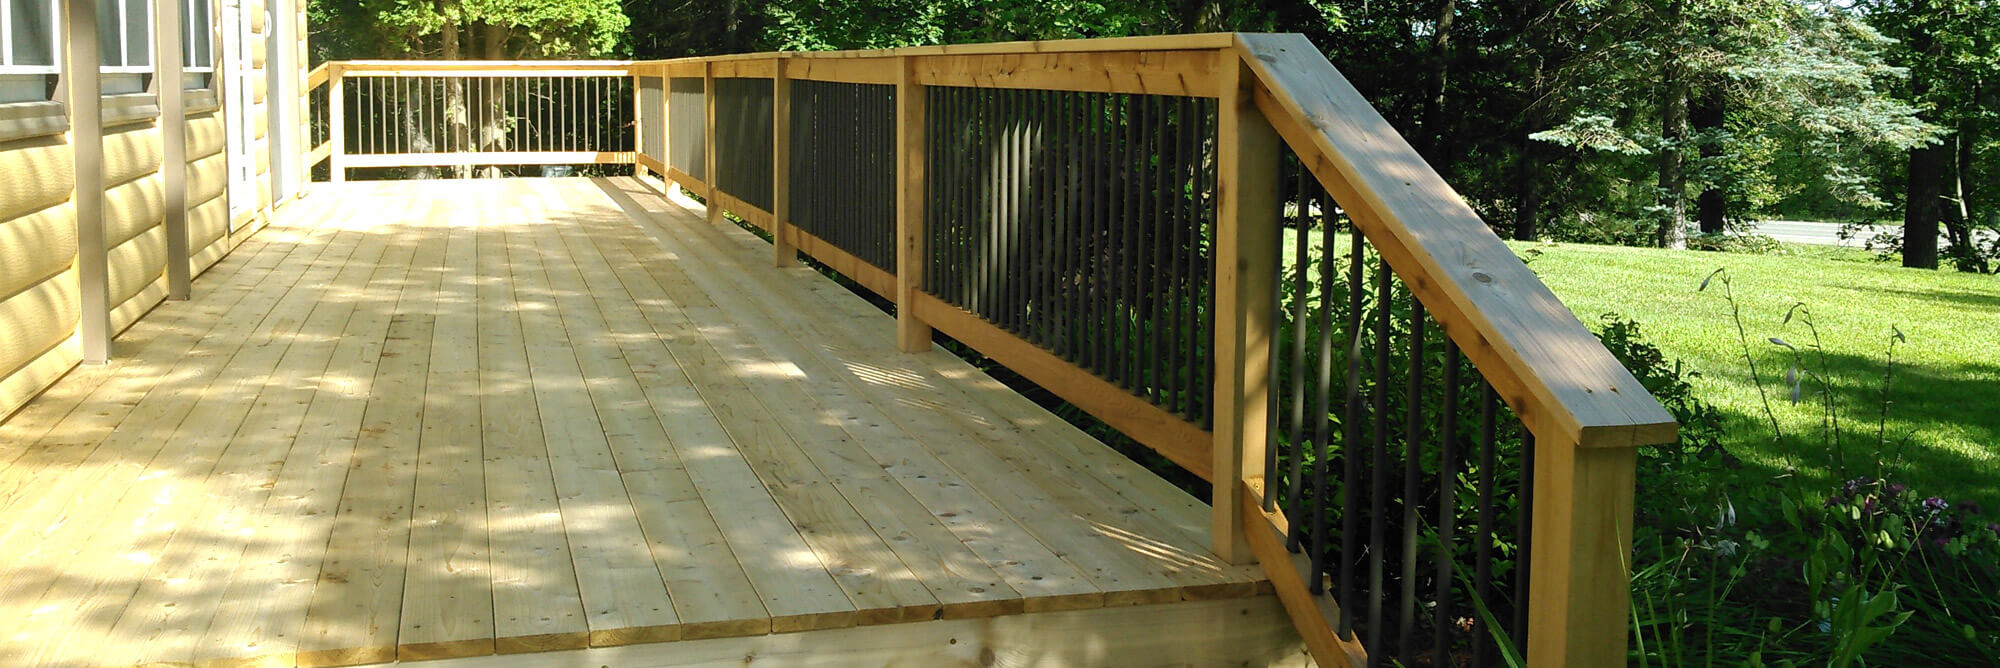 Newly constructed cedar wood deck with wrought iron railings